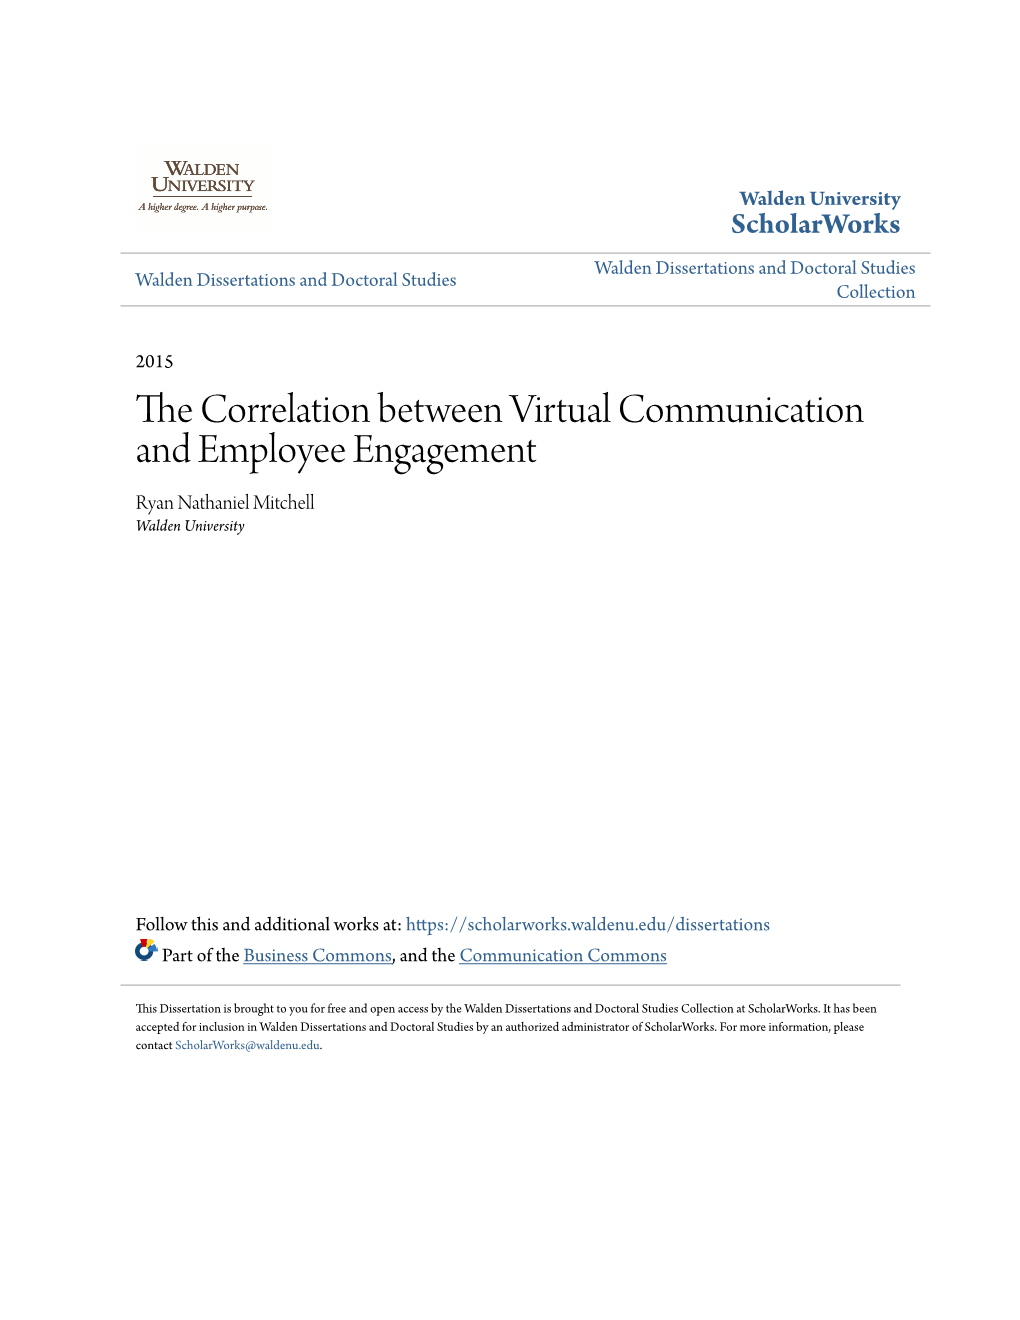 The Correlation Between Virtual Communication and Employee Engagement